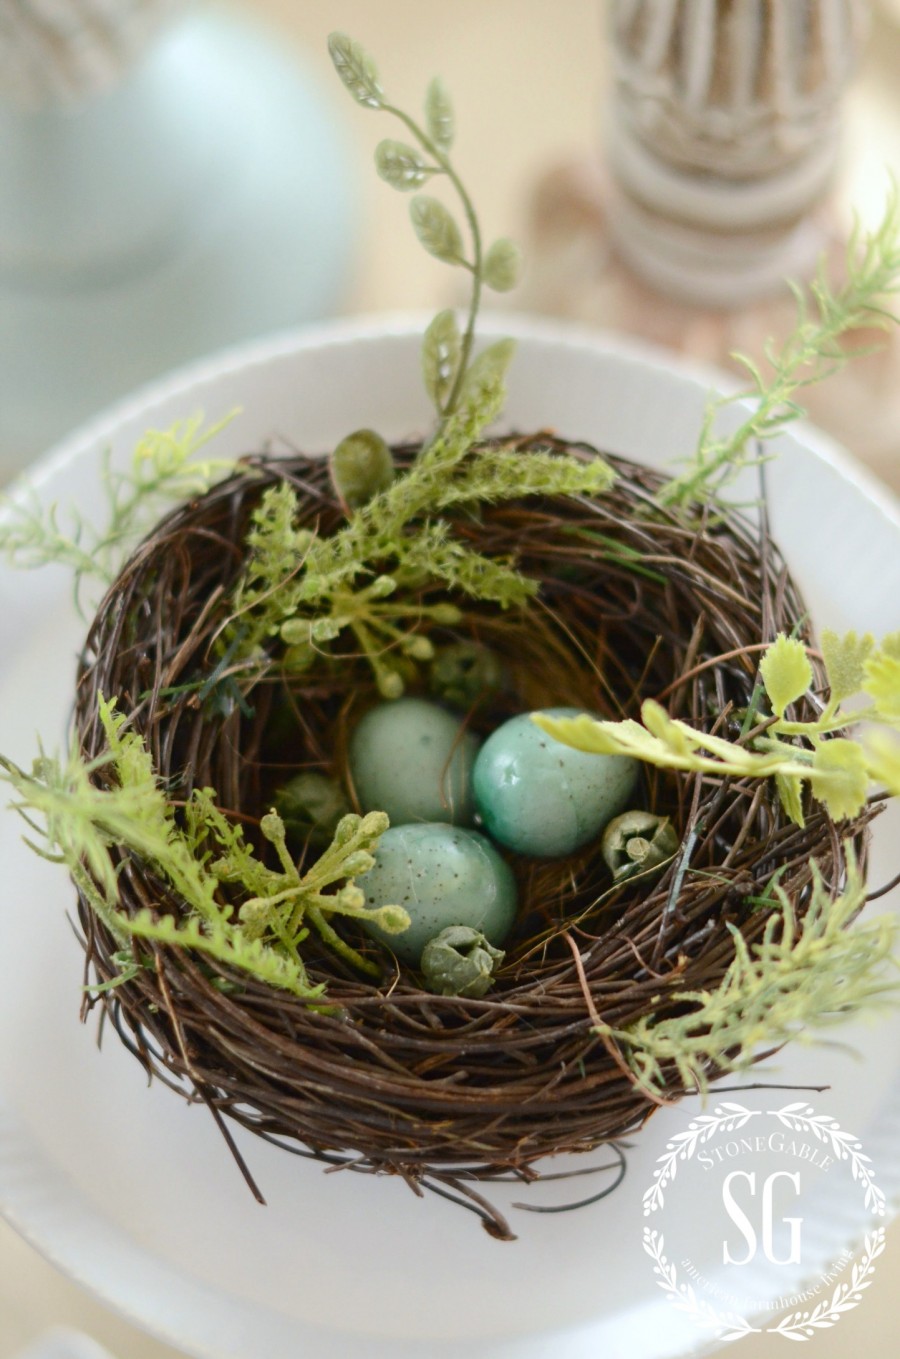 HOW TO DECORATE FOR SPIRNG AFTER EASTER